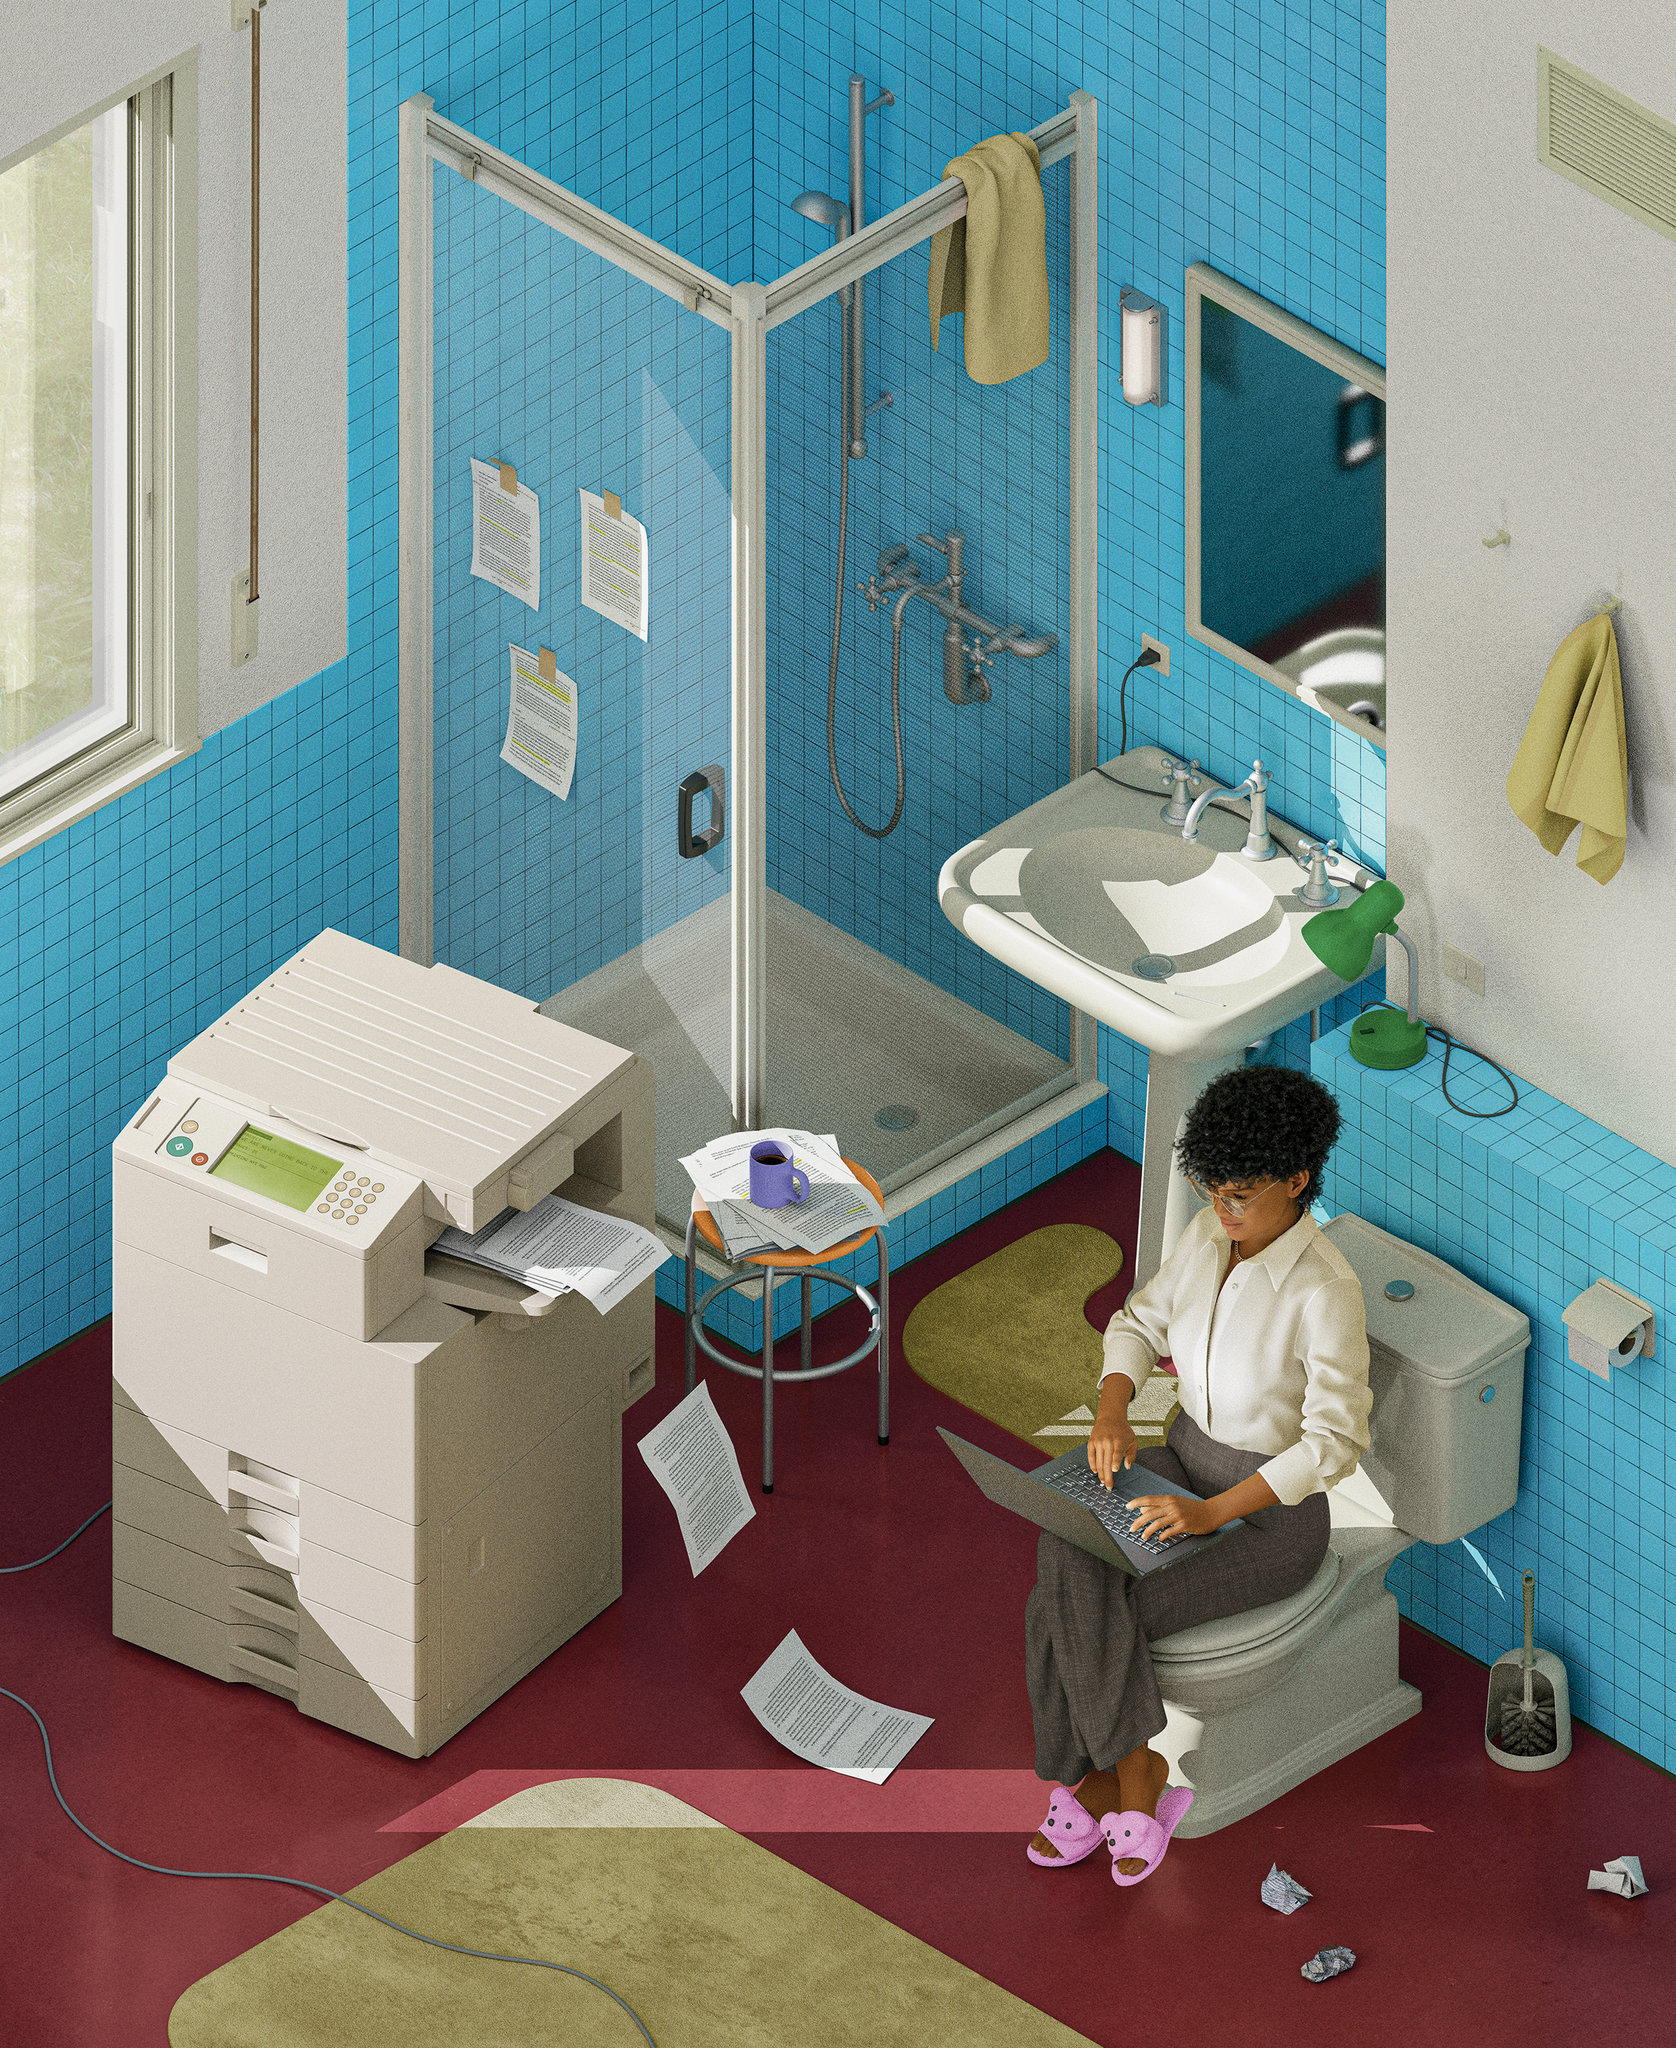 Bathroom - Working Remote - New York Times Josh Harcus Illustration by Max Guther